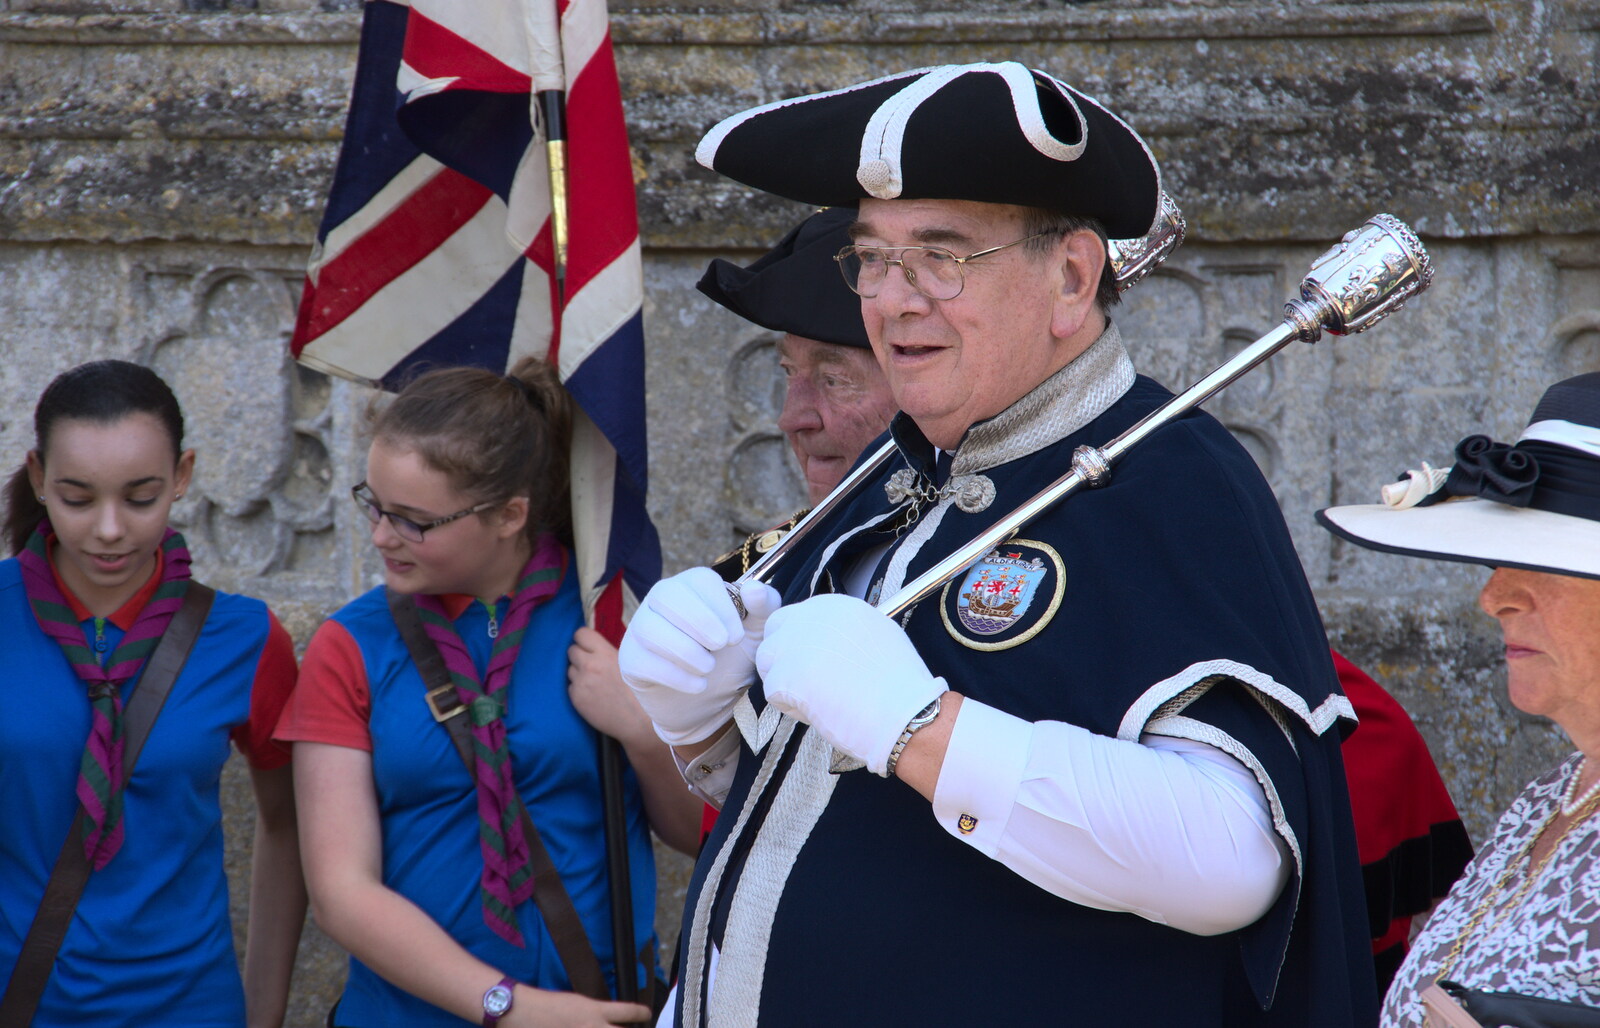 Ninja moves with dual maces from The Mayor Making Parade, Eye, Suffolk - 24th June 2018